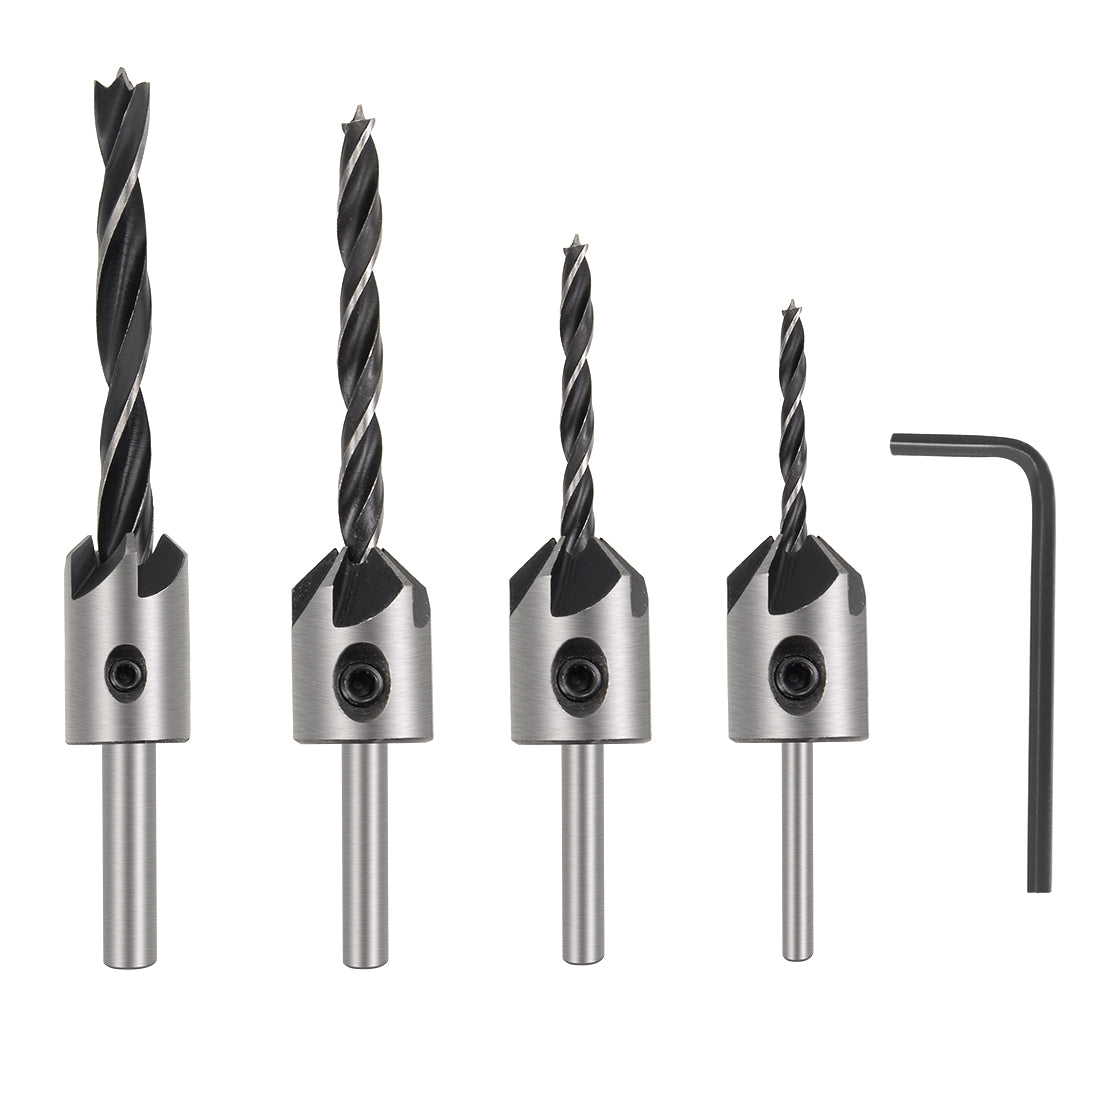 uxcell Uxcell Countersink Drill Bits for Wood 3mm to 6mm Adjustable Reamer with Hex Wrench for Punch Tool Woodworking Carpentry DIY HSS 4in1 Set